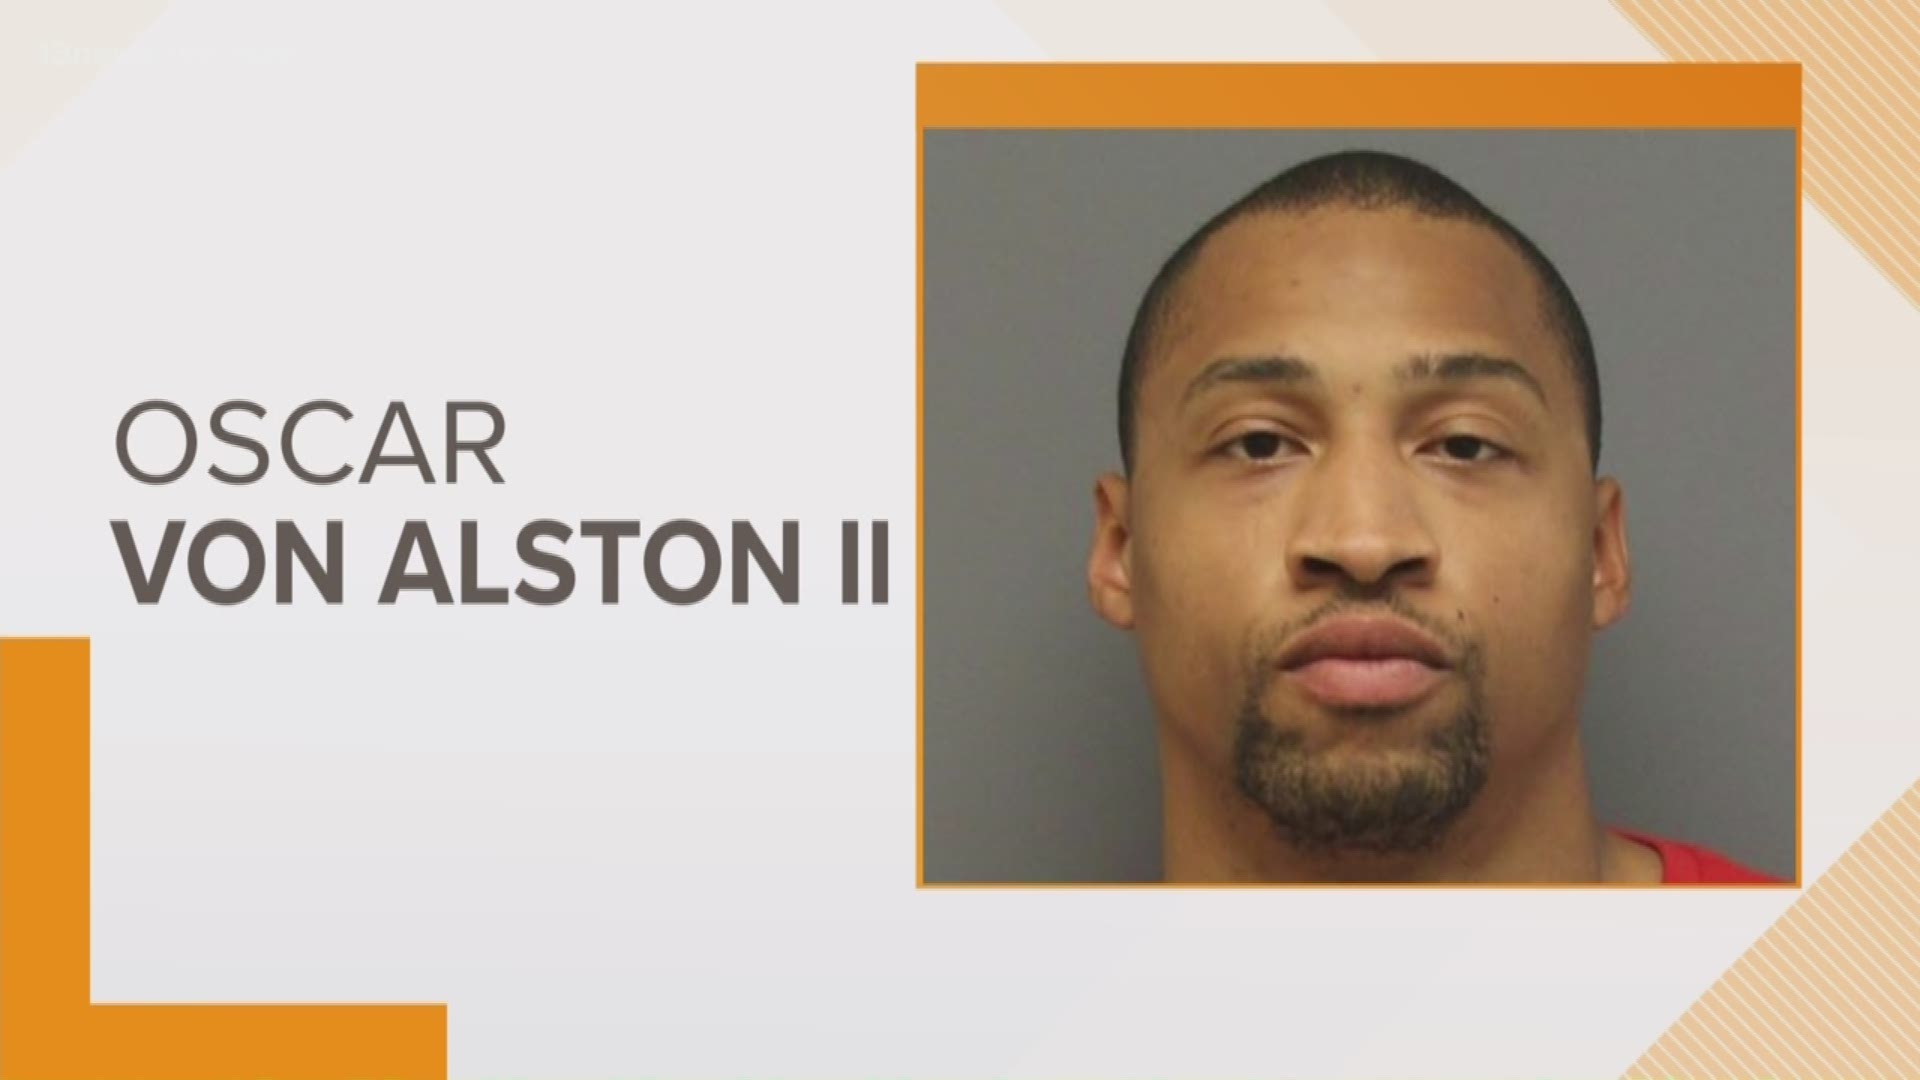 Oscar Von Alston II, who police said robbed a credit union Wednesday in Newport News, is now being accused of making multiple bomb threats, an official said.